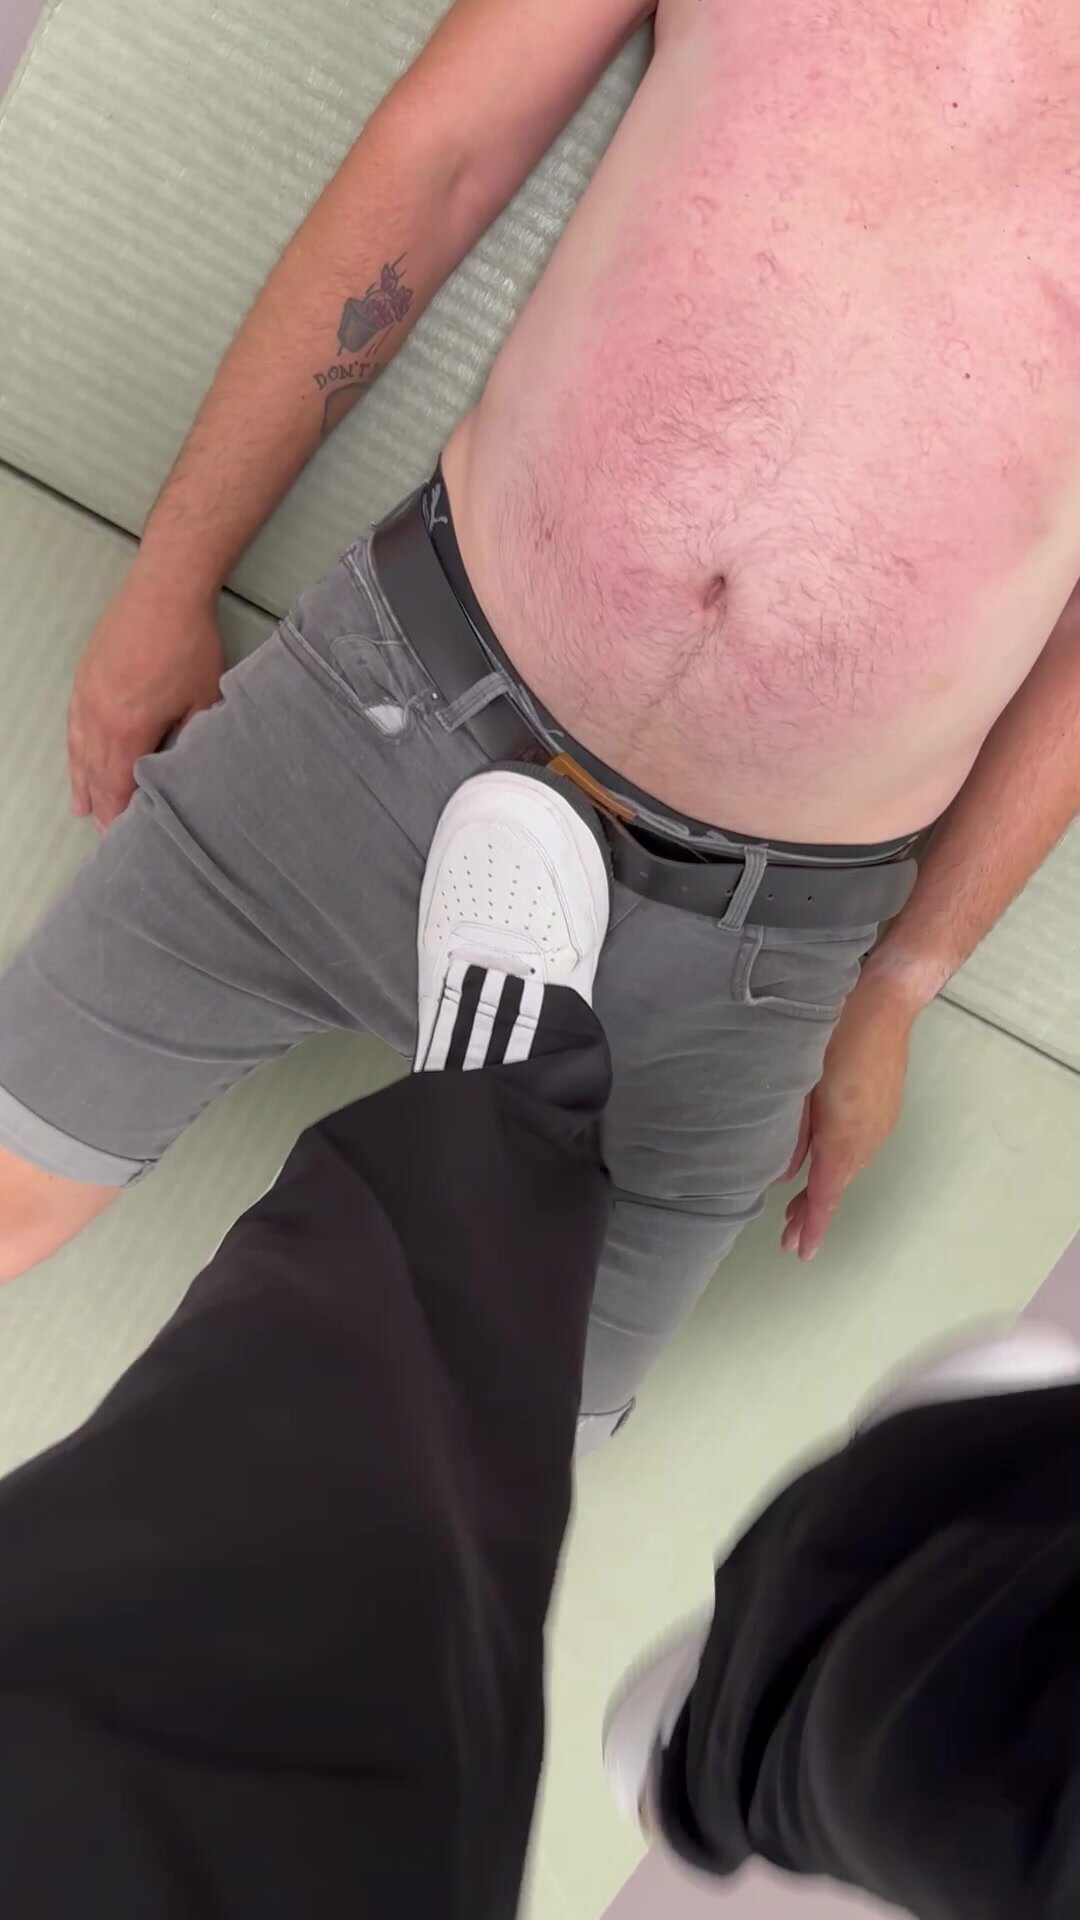 Trampling on slaves cock and balls